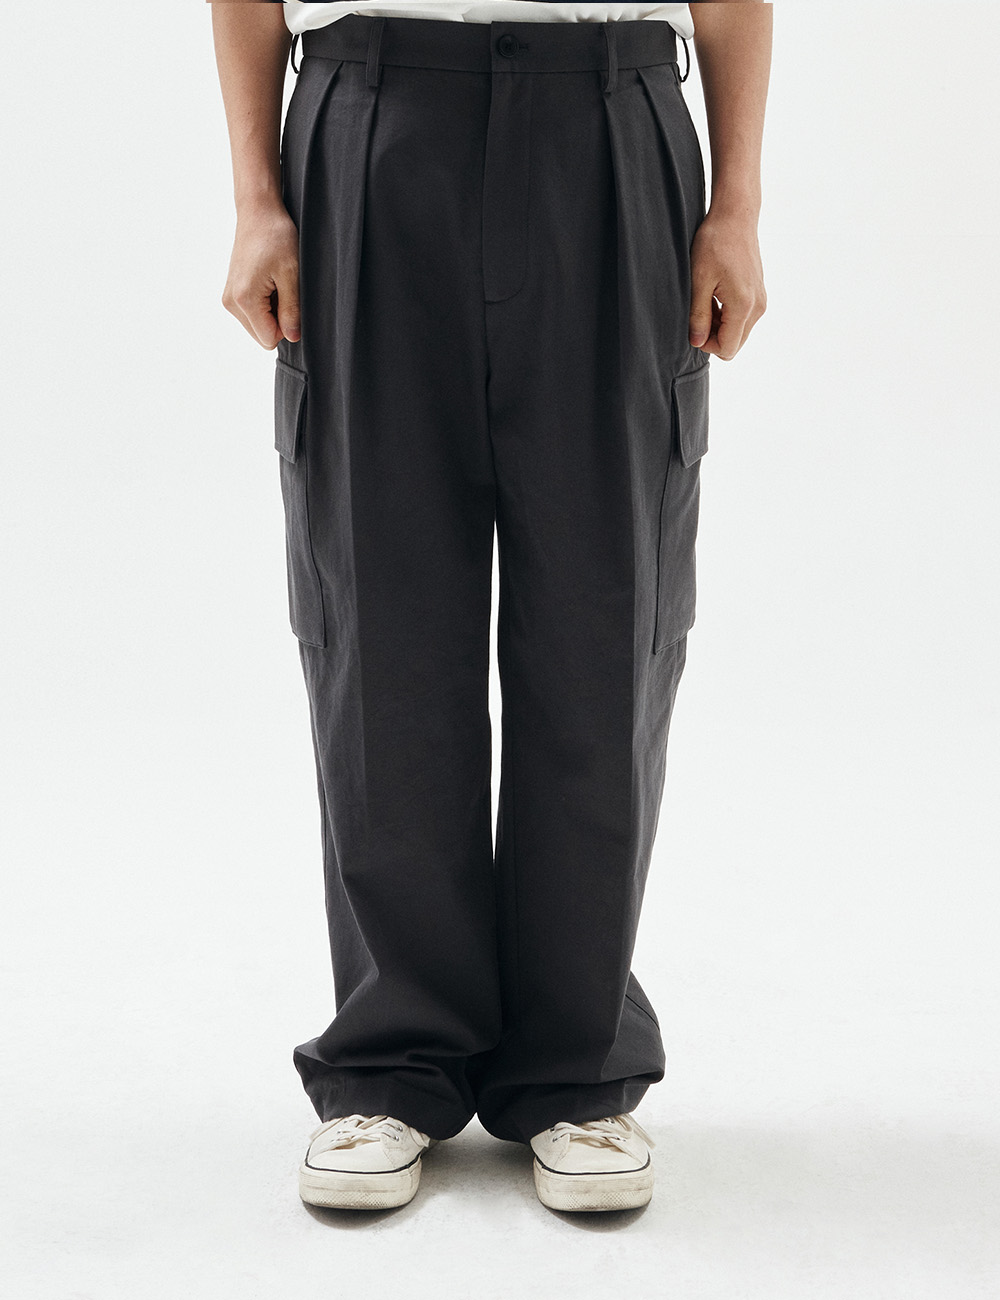 [ESFAI] WIDE CARGO PANTS PPP47 (CHARCOAL GRAY)